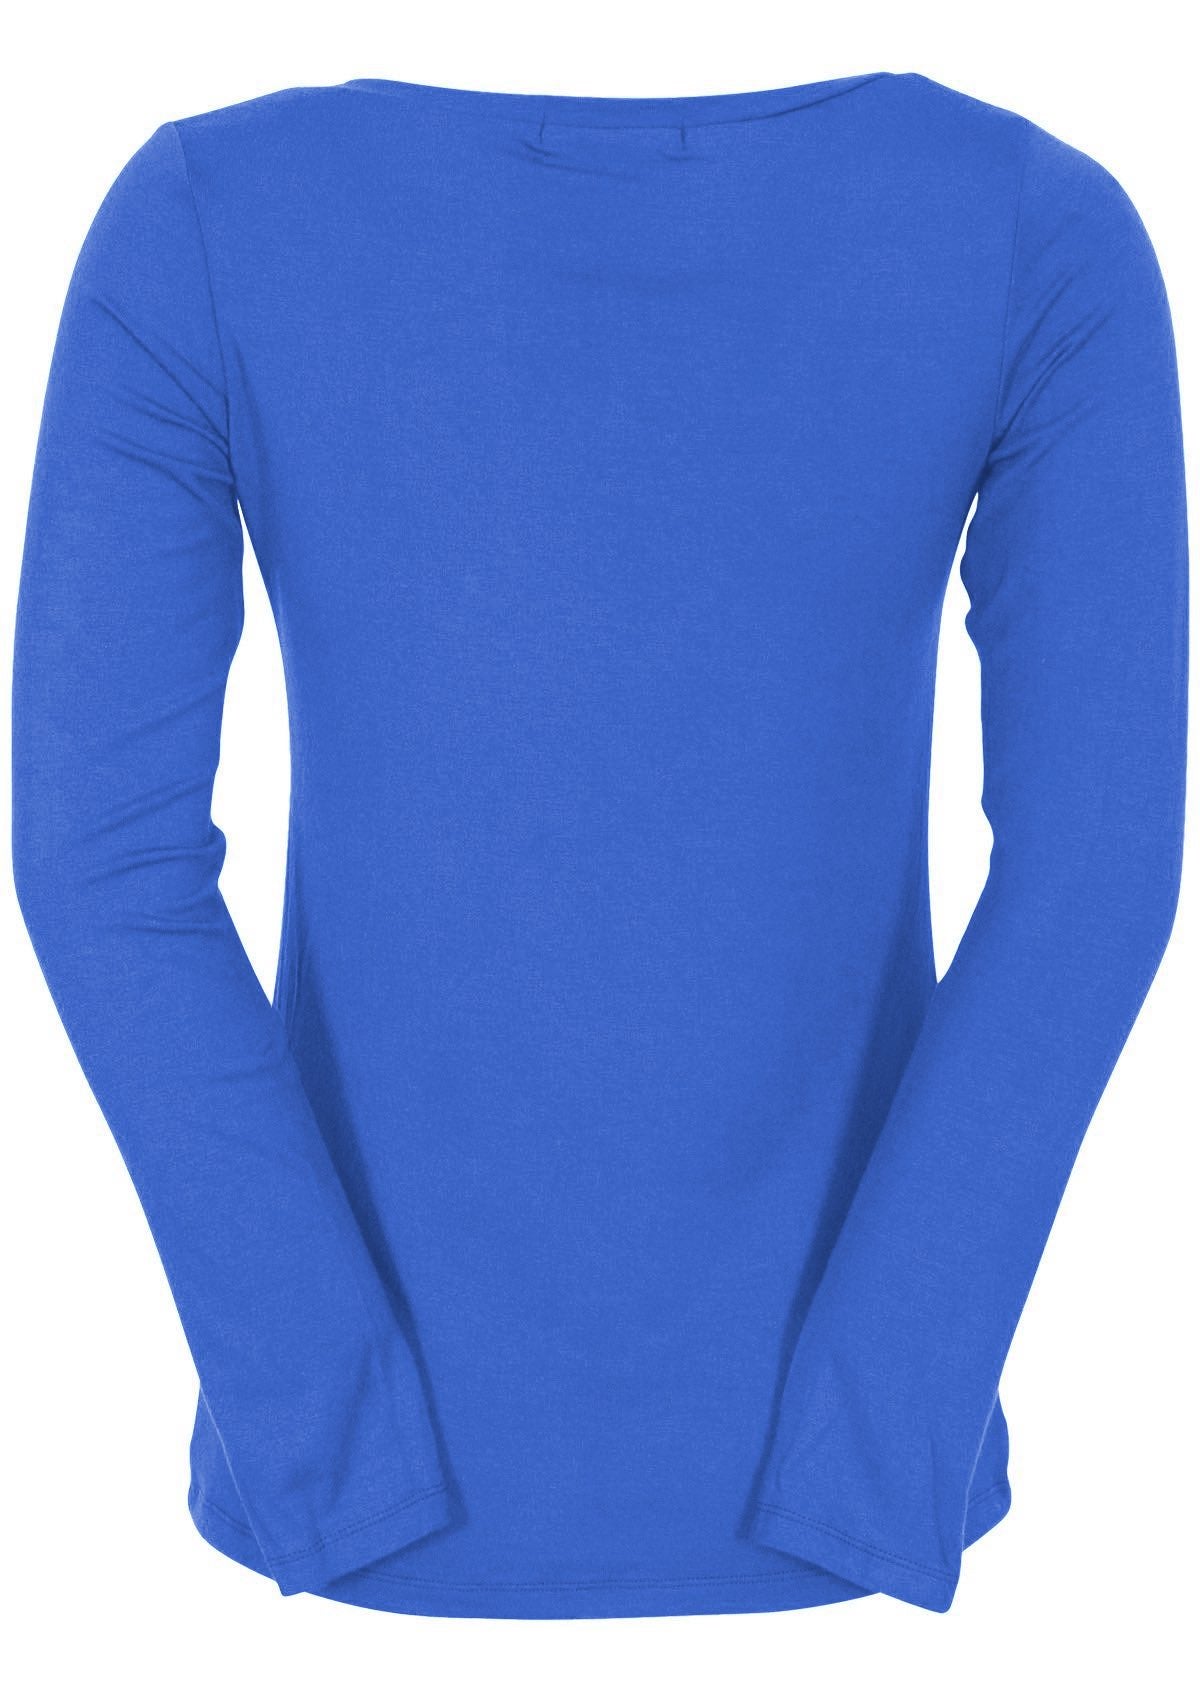 Back view of women's blue long sleeve stretch v-neck soft rayon top.